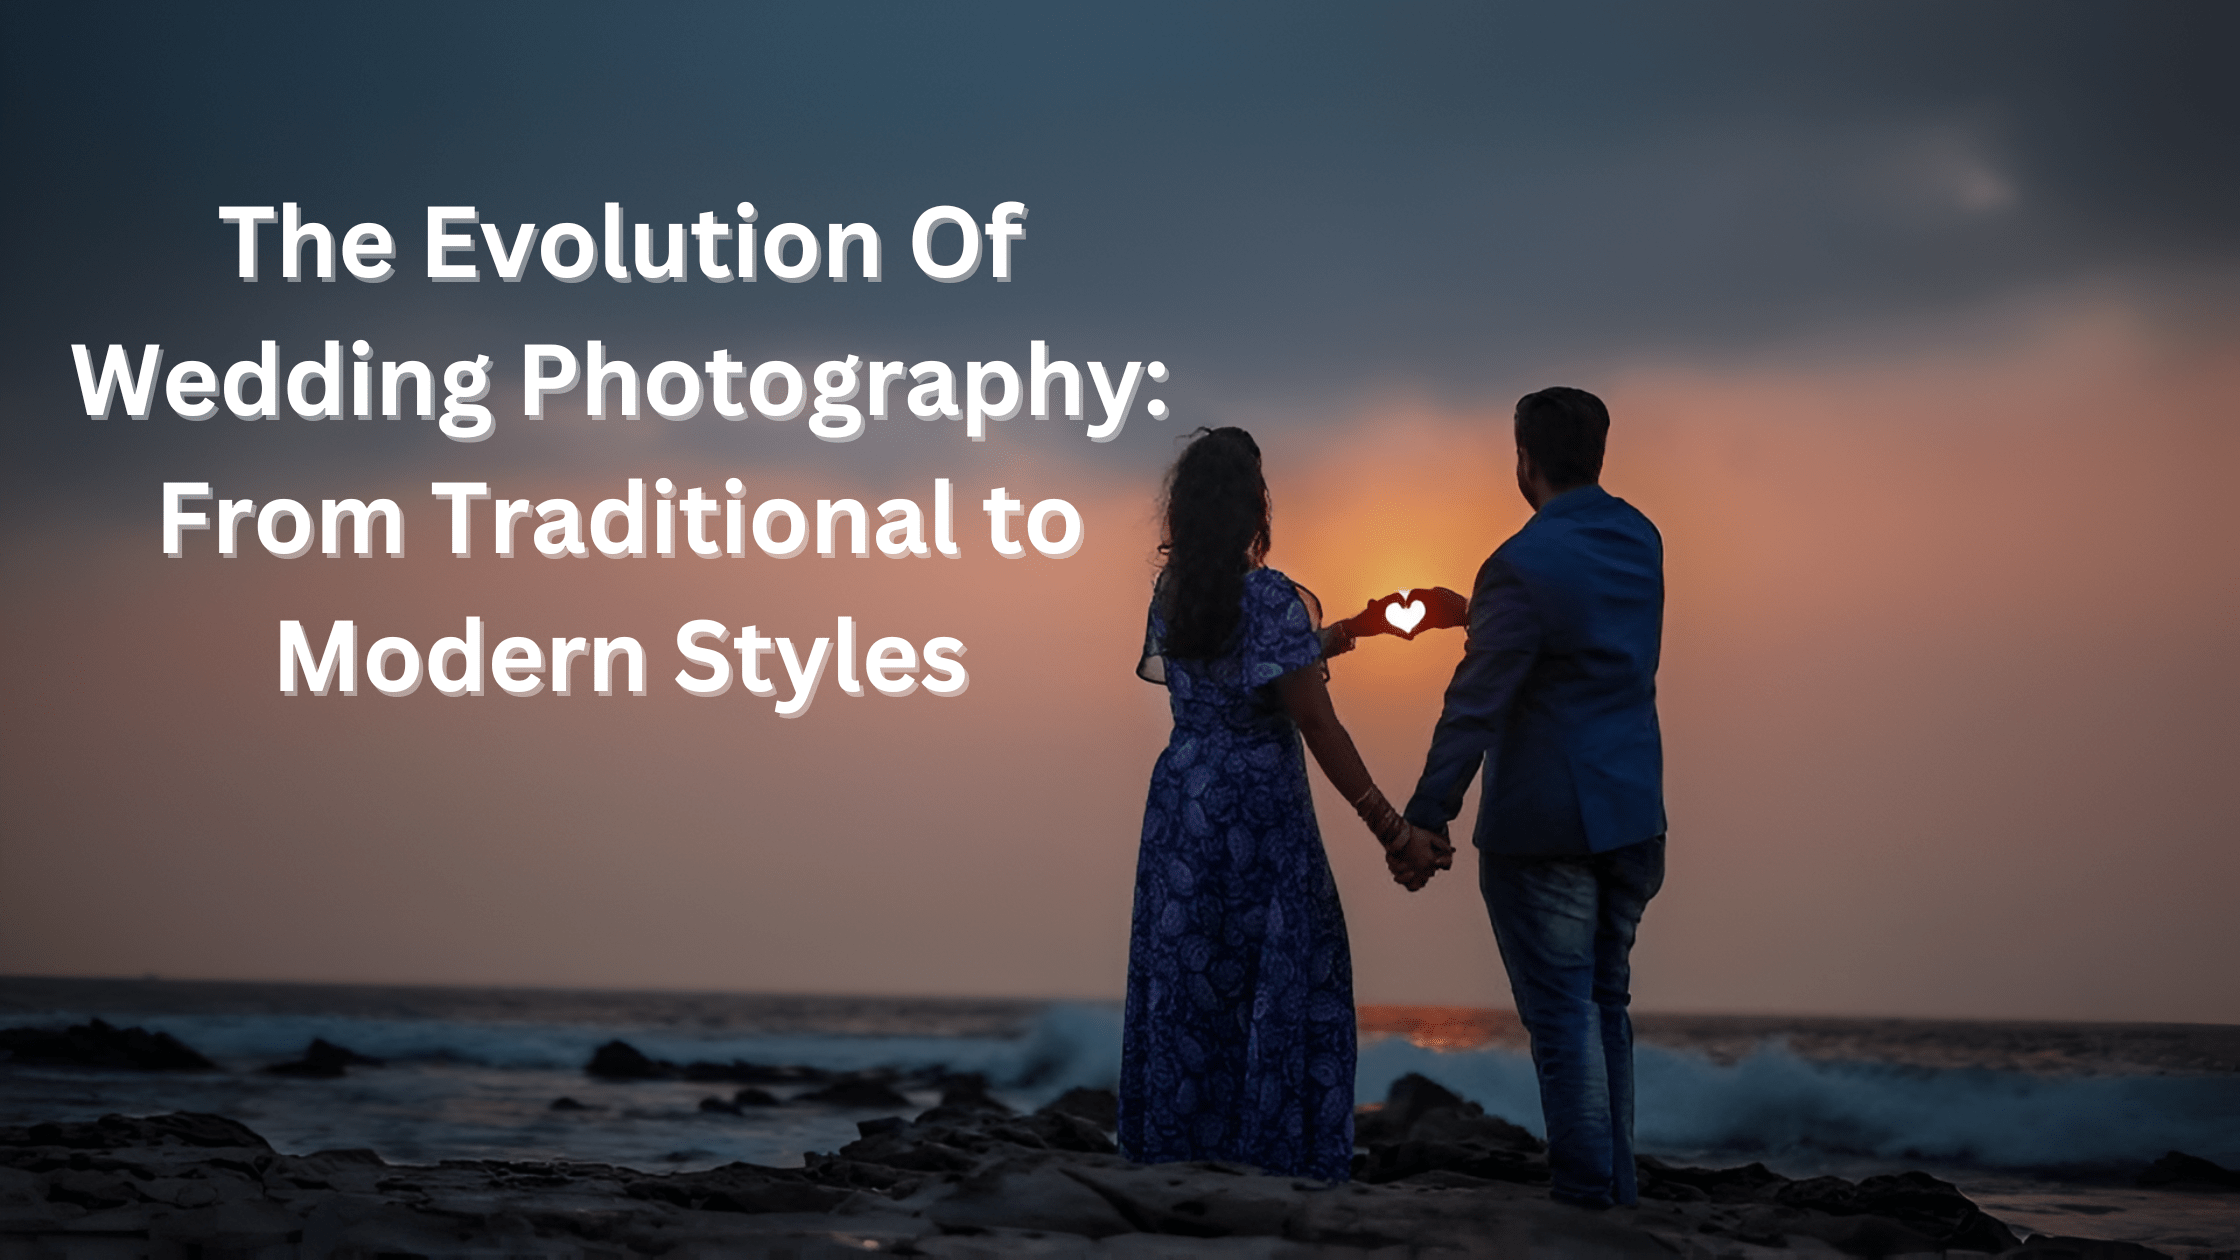 The Evolution Of Wedding Photography: From Traditional to Modern Styles